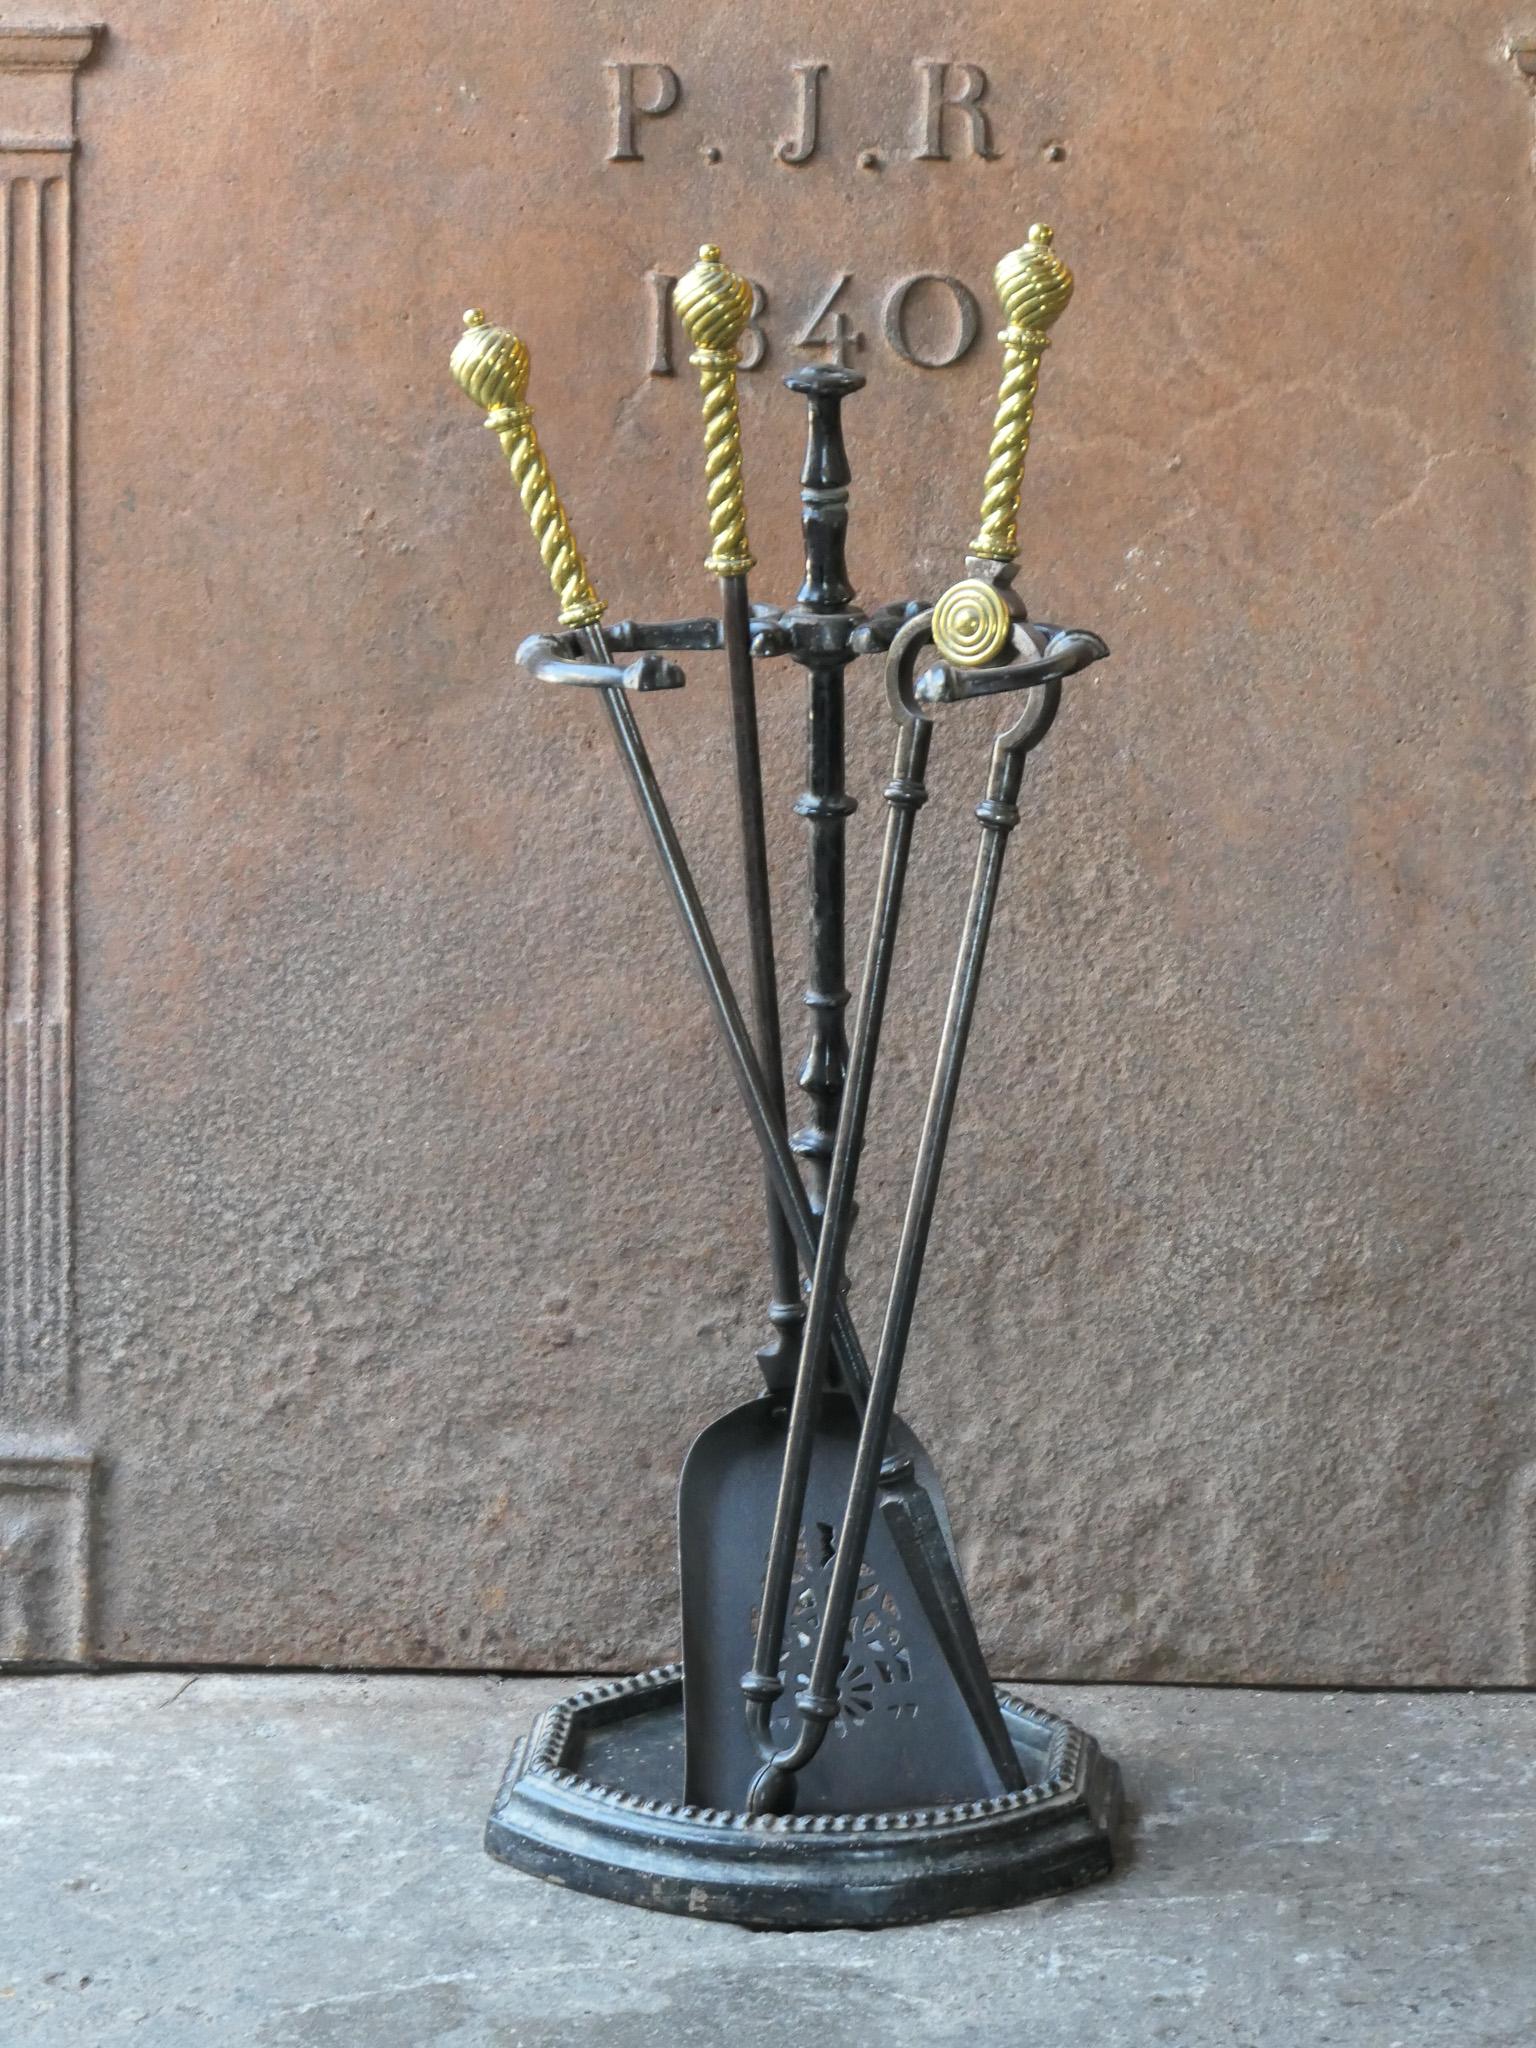 19th century English Victorian period fireplace toolset. The tools are made of wrought iron with brass handles, while the base is made of cast iron. The toolset consists of tongs, poker, shovel and stand. The condition is good.








.